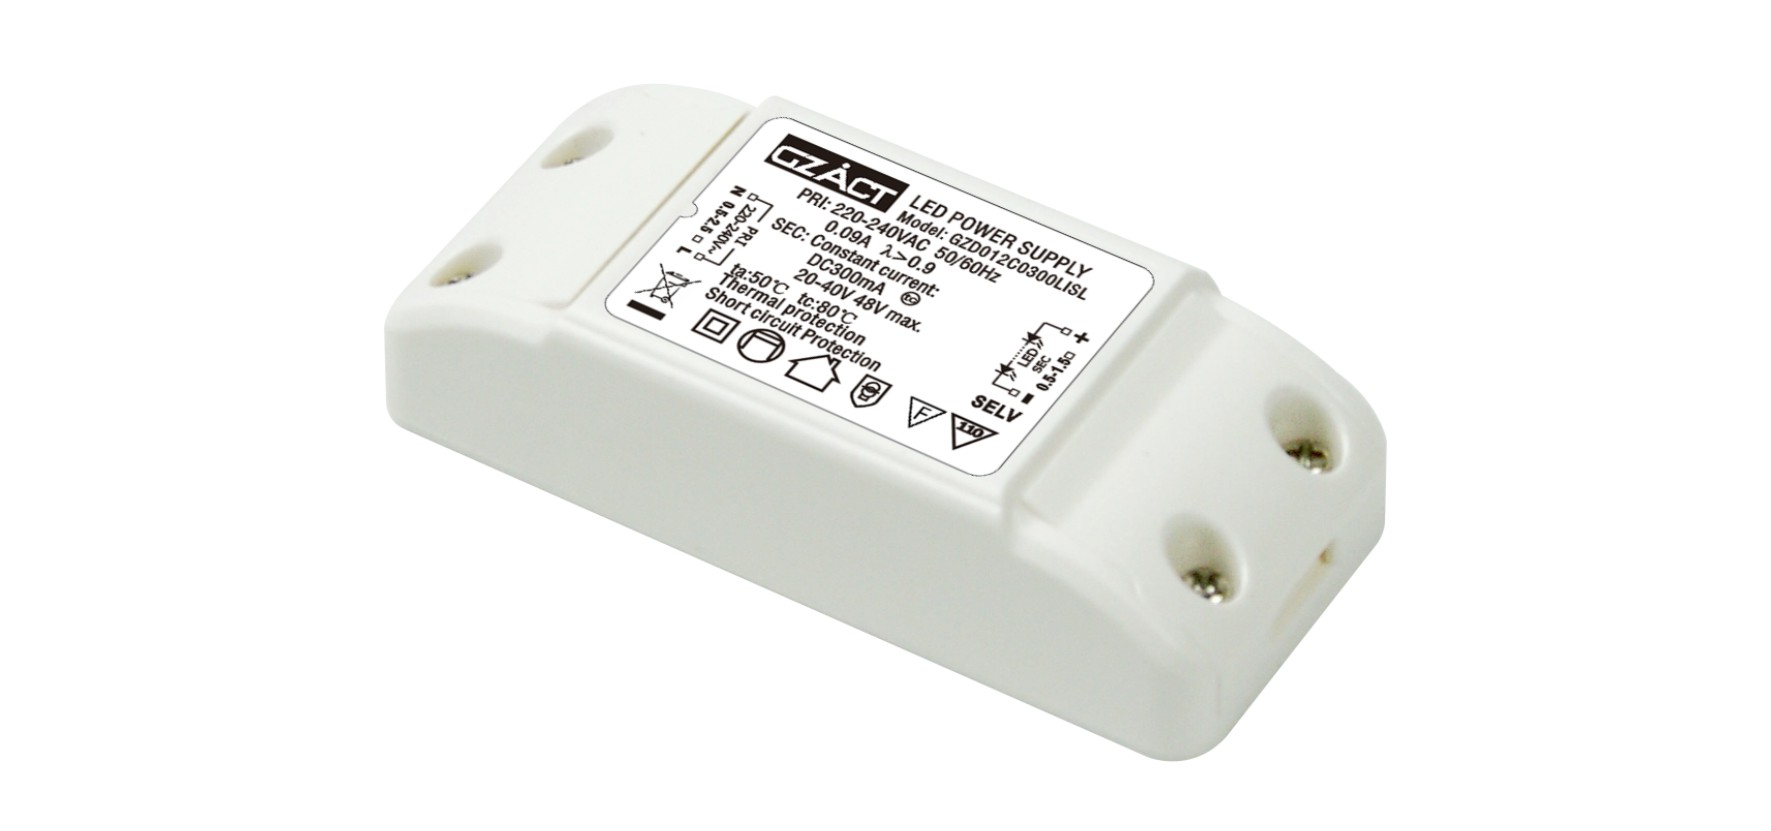 TUV CE SAA CCC 8-12W led driver constant current 700ma switched power suply